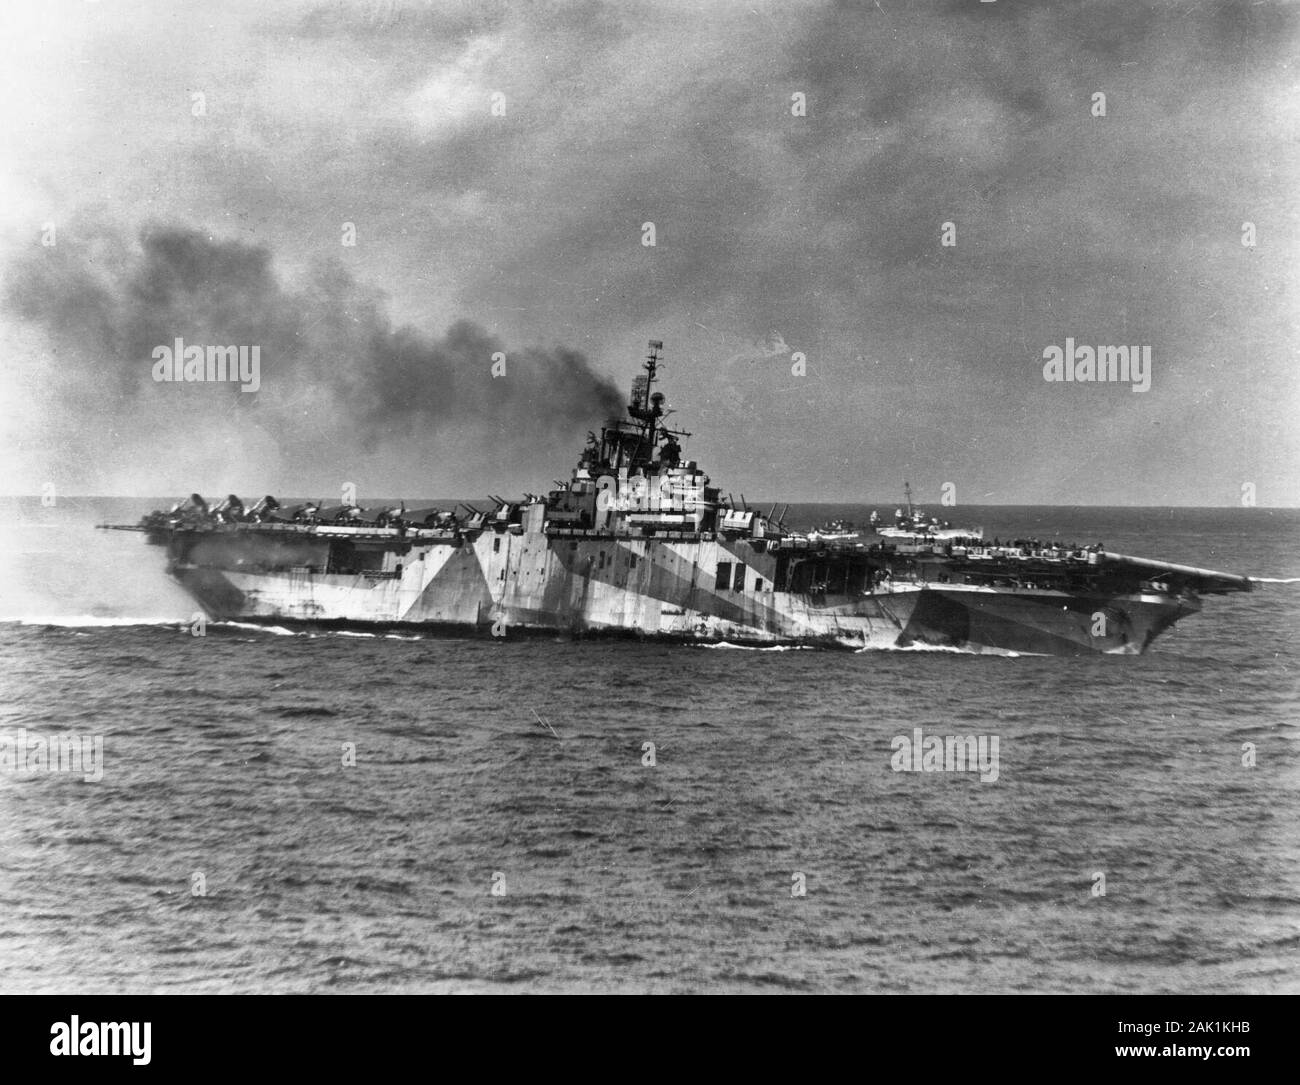 The U.S. Navy aircraft carrier USS Ticonderoga (CV-14) lists to port in the aftermath of a kamikaze attack in which four suicide planes hit the ship, 21 January 1945. Note her camouflage scheme measure 33/10A and the Fletcher-class destroyer in the background. Stock Photo